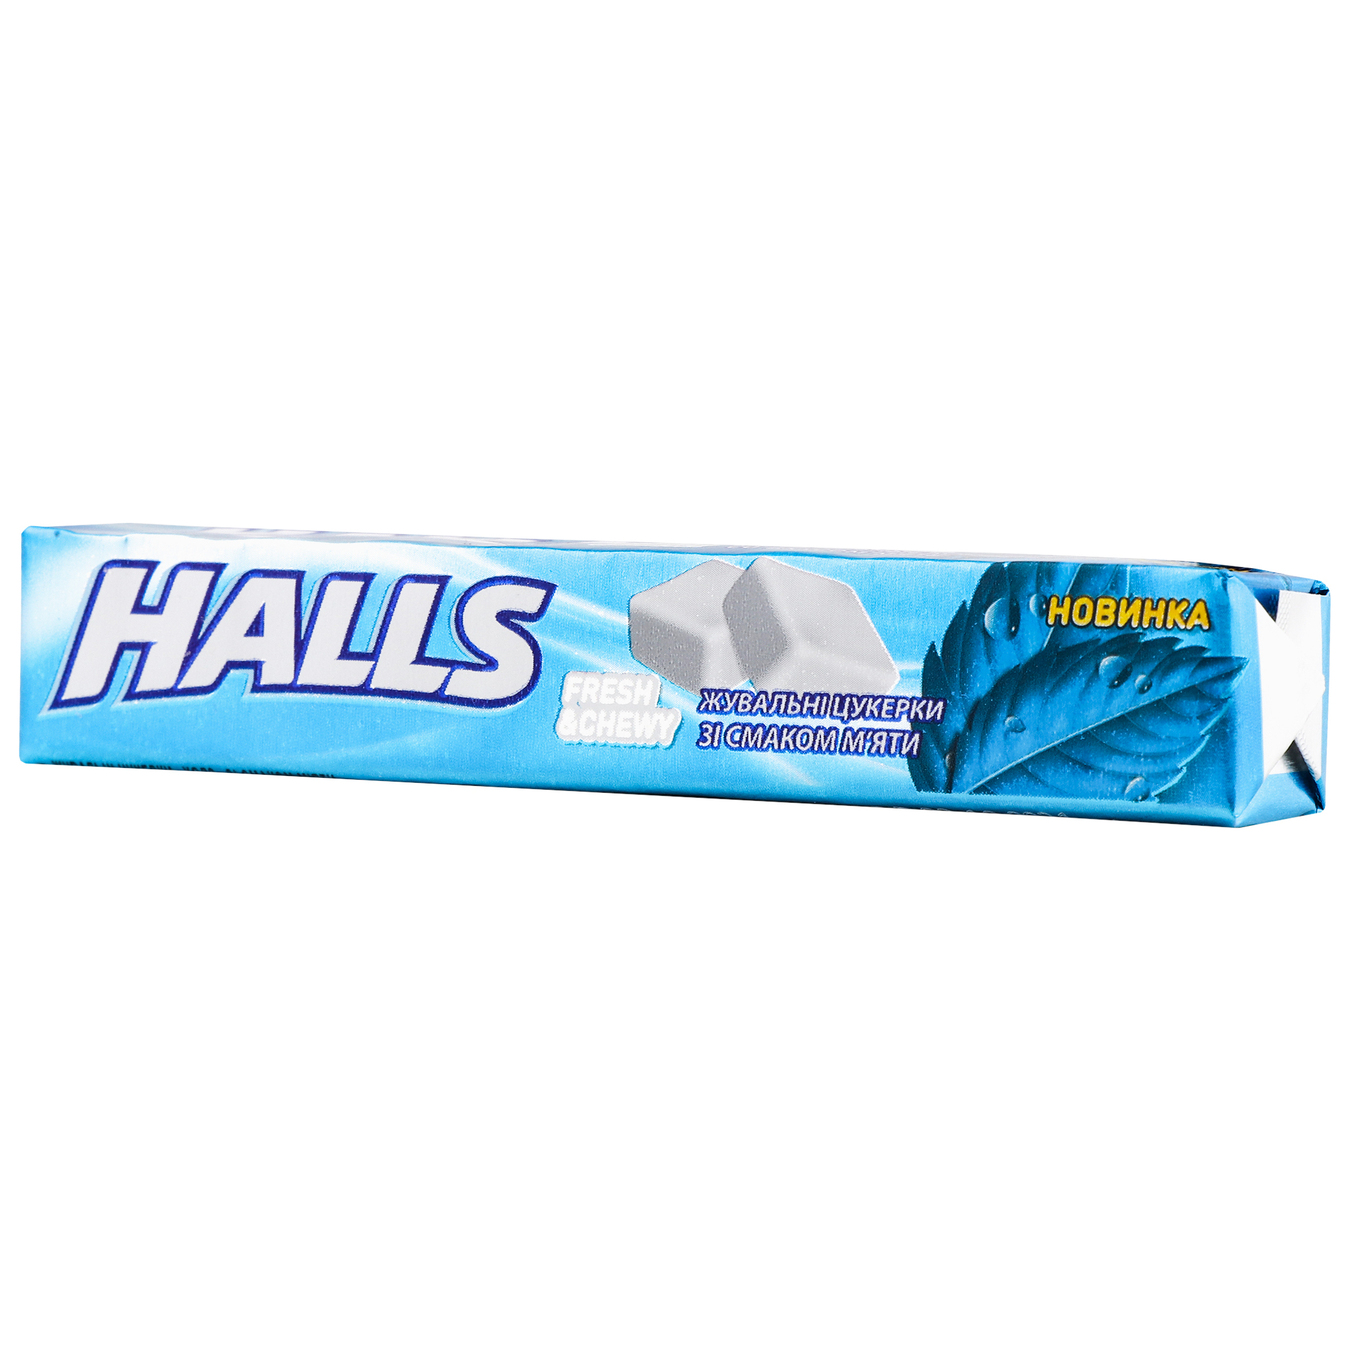 Halls chewing candies with mint flavor 47g 3